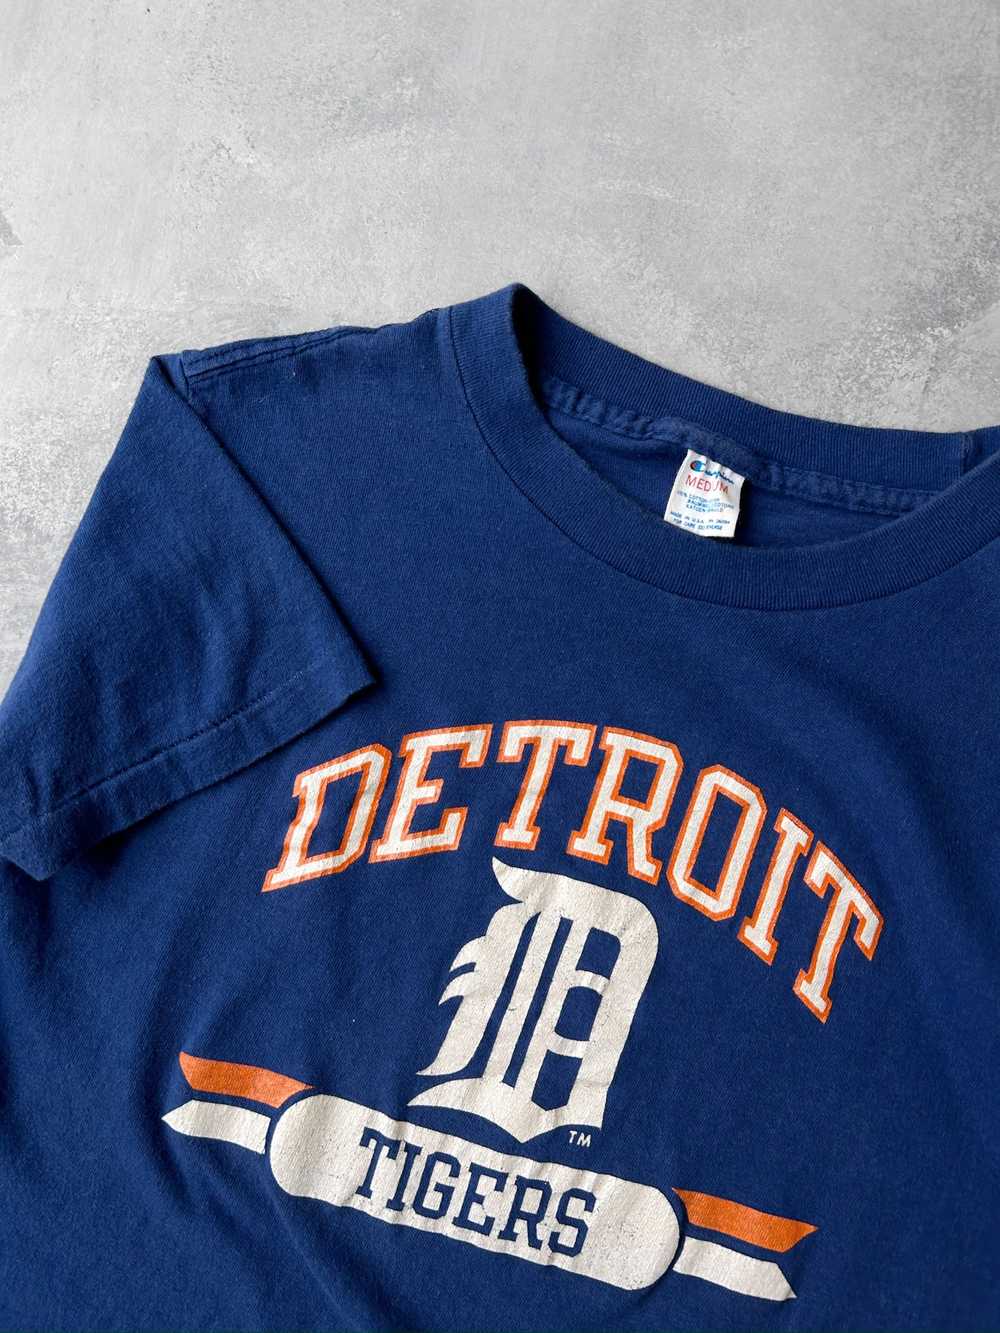 Detroit Tigers T-Shirt 80's - Small - image 2